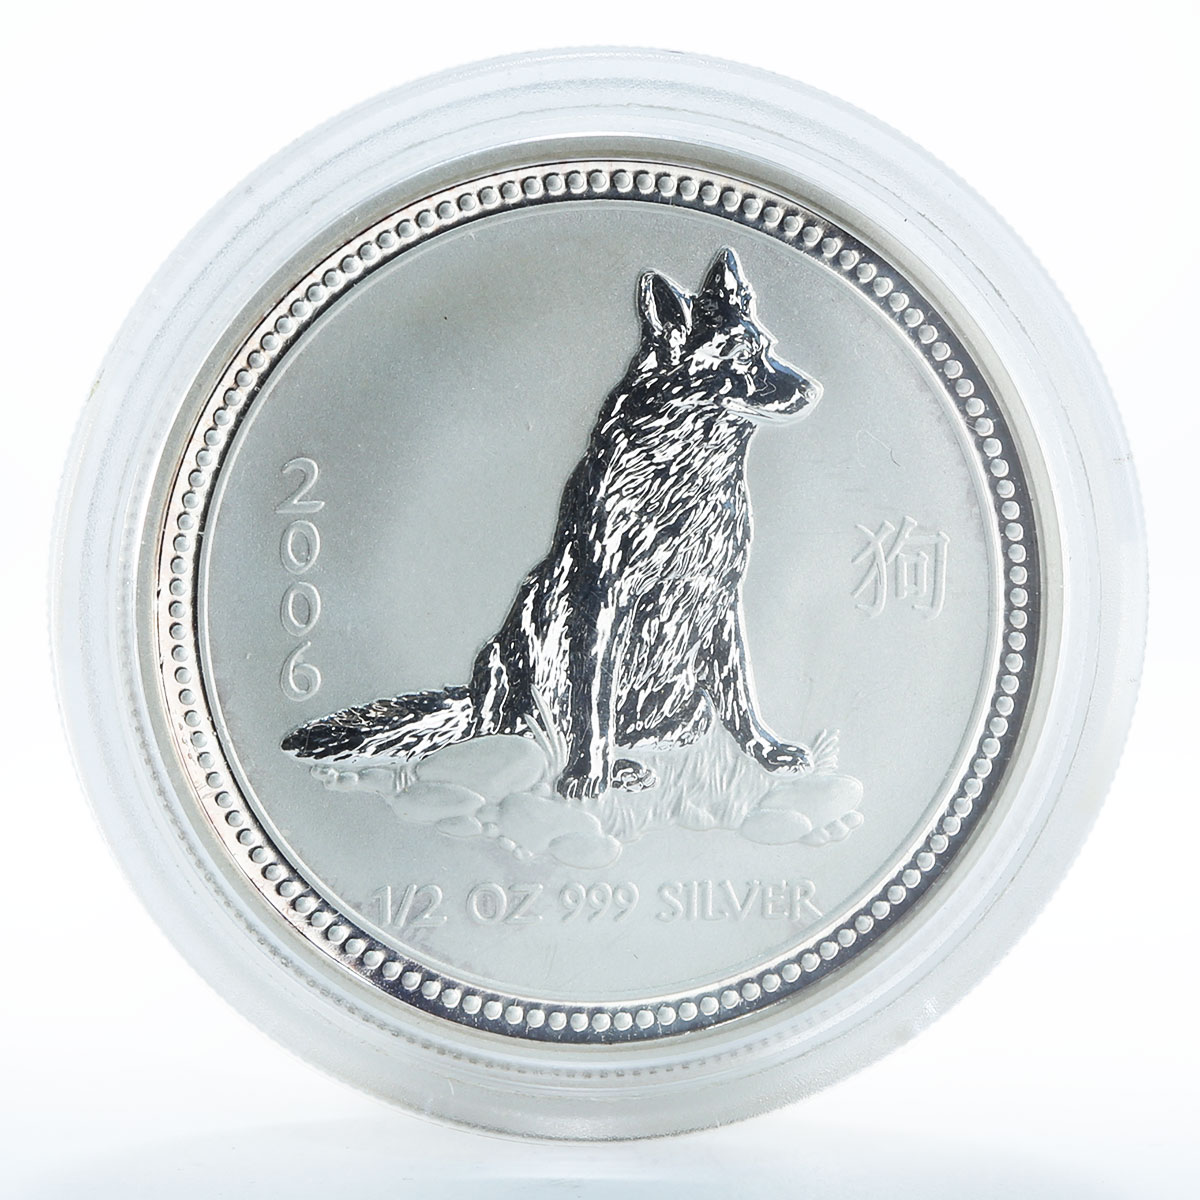 Australia, 50c, Year of the Dog Series I,1/2oz Silver Coin oxides scratches 2006